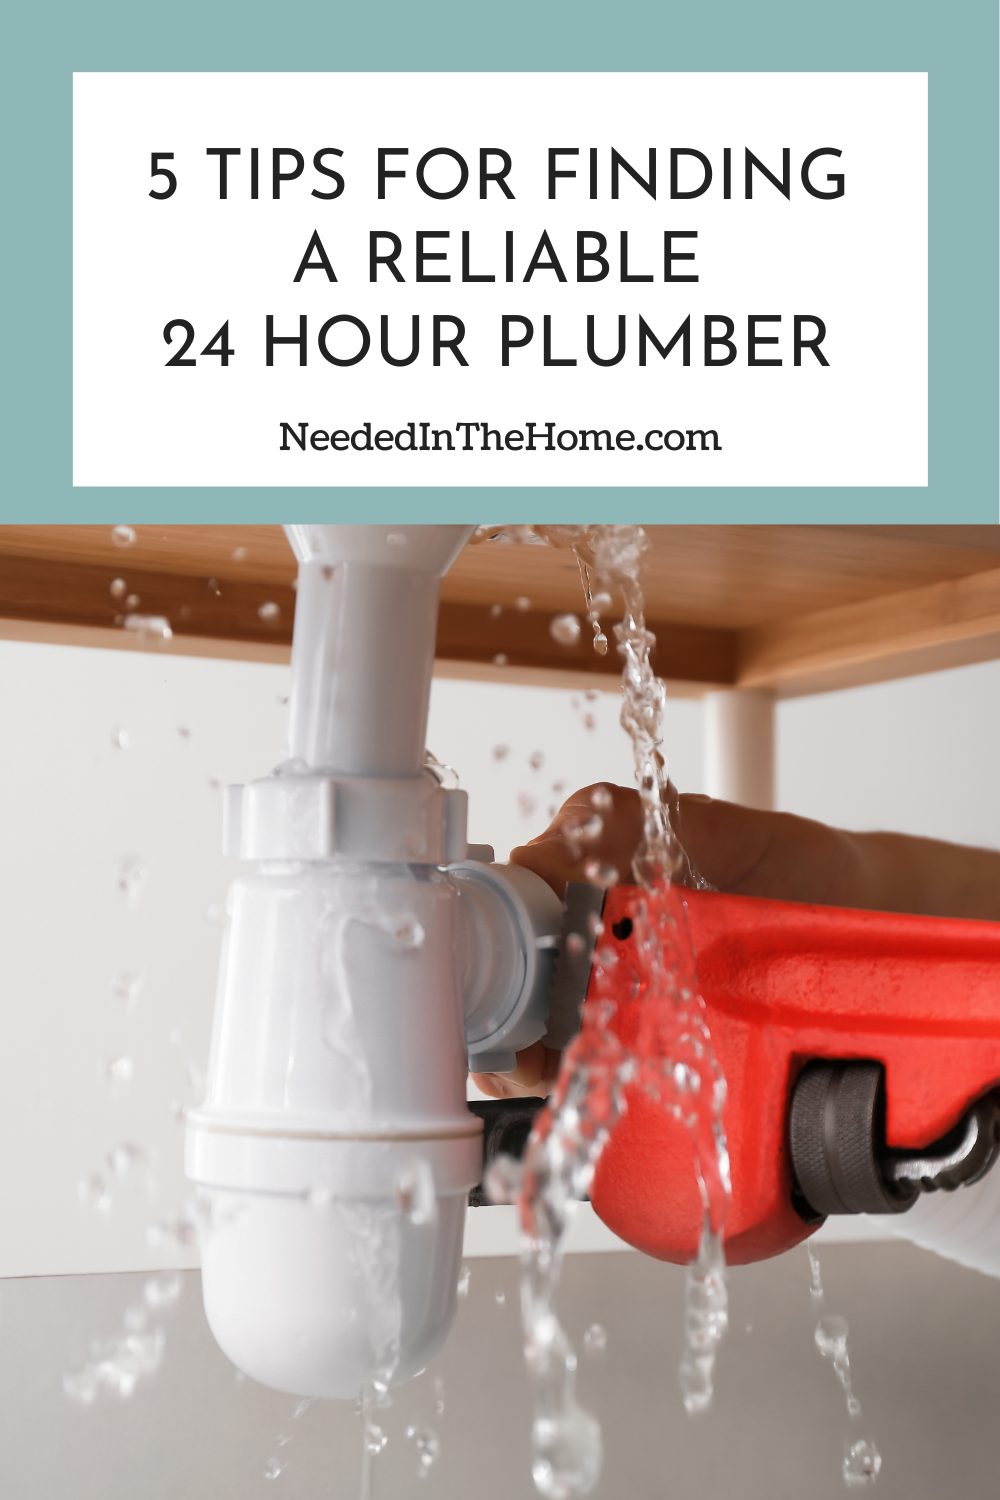 pinterest pin description 5 tips for finding a reliable 24 hour plumber water dripping from pipe under sink with wrench on pipe to repair it neededinthehome